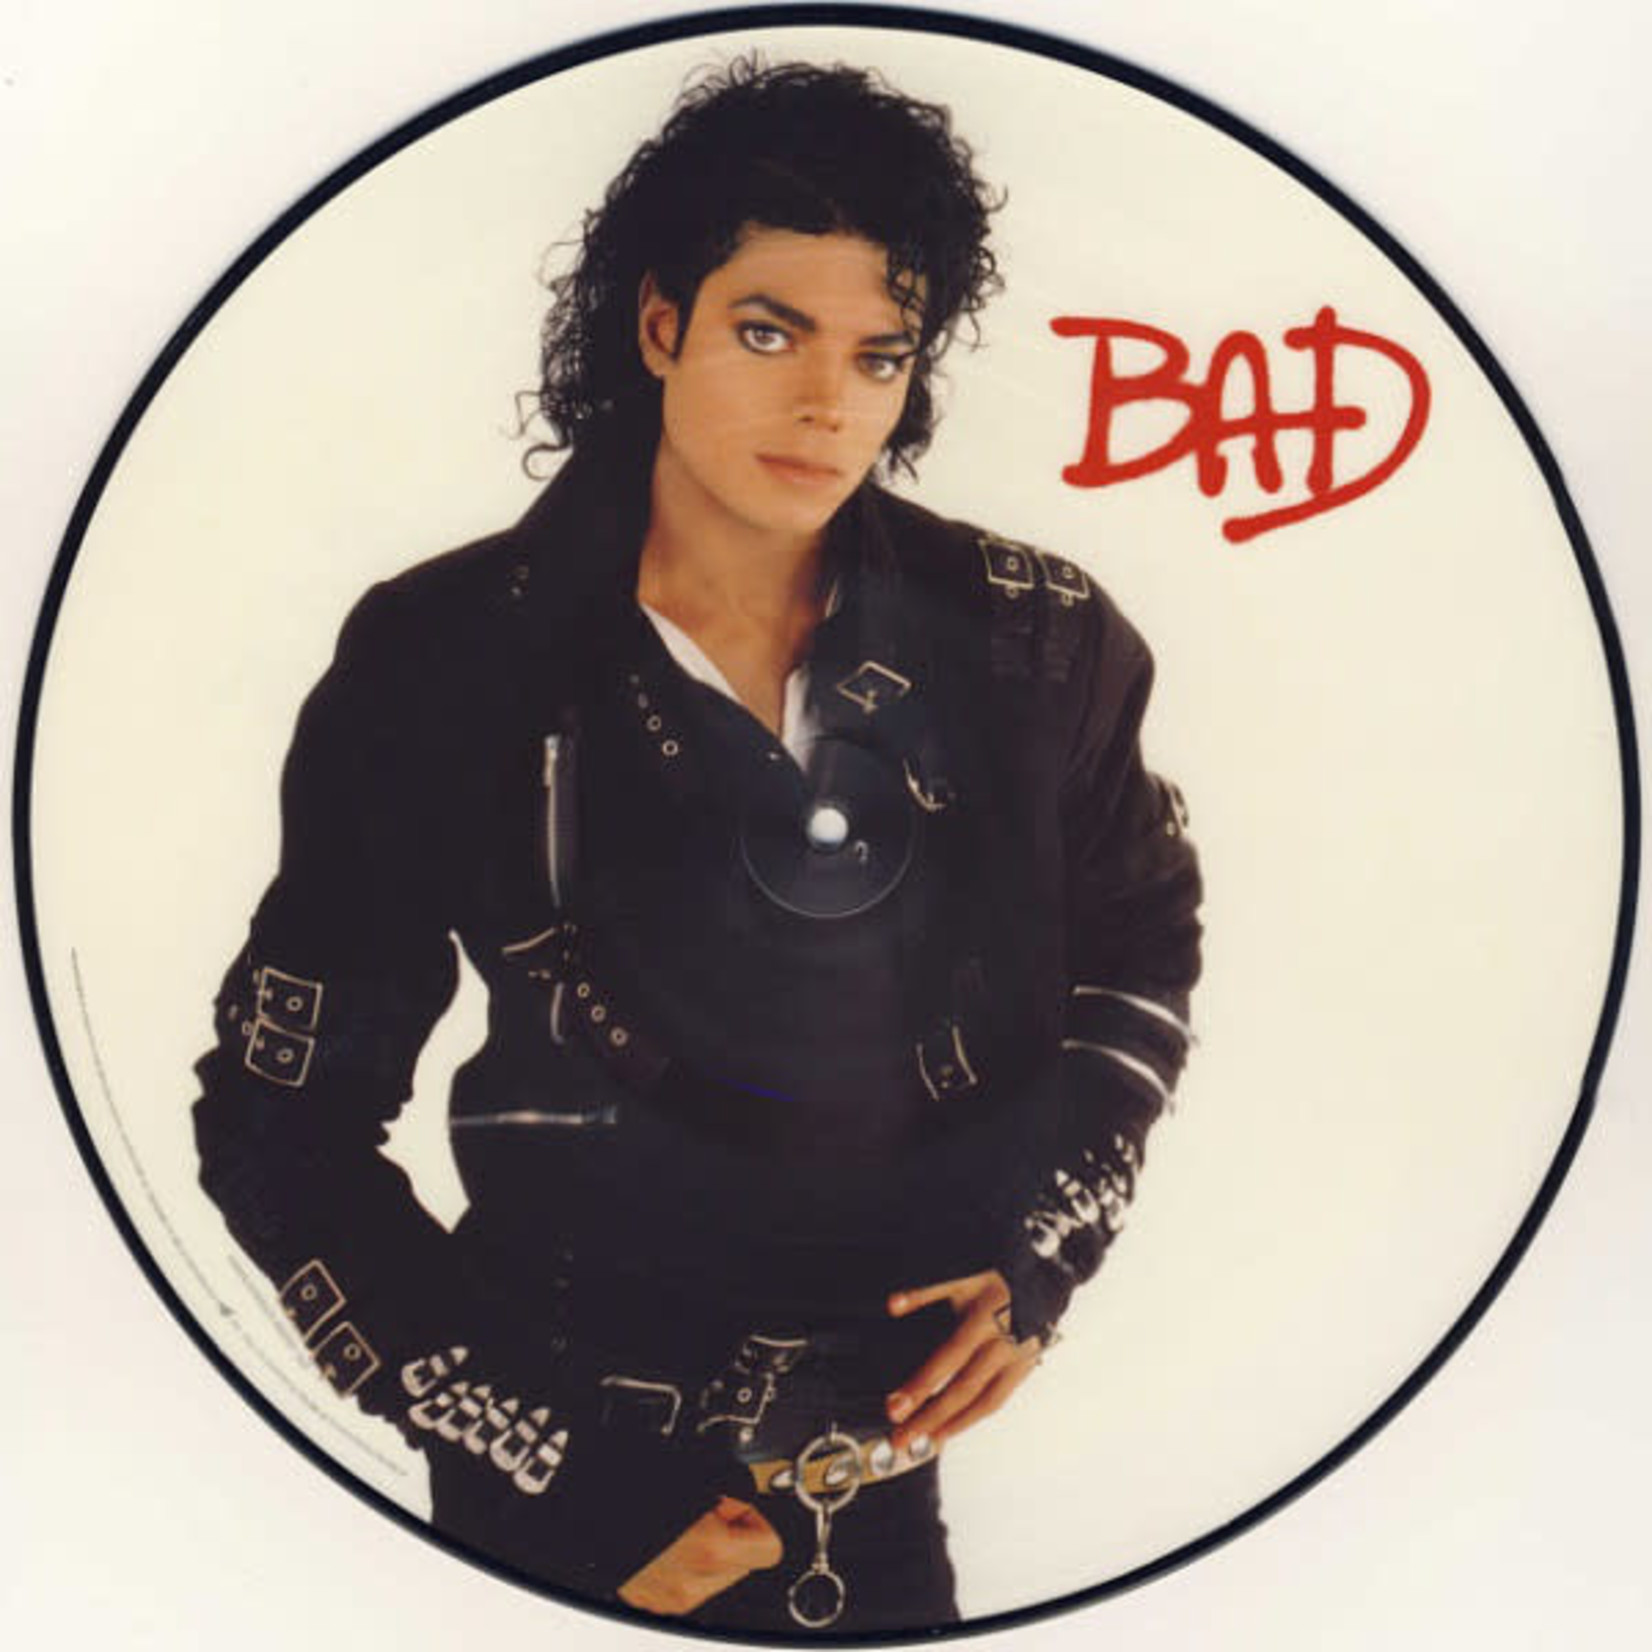 [New] Michael Jackson - Bad (picture disc)